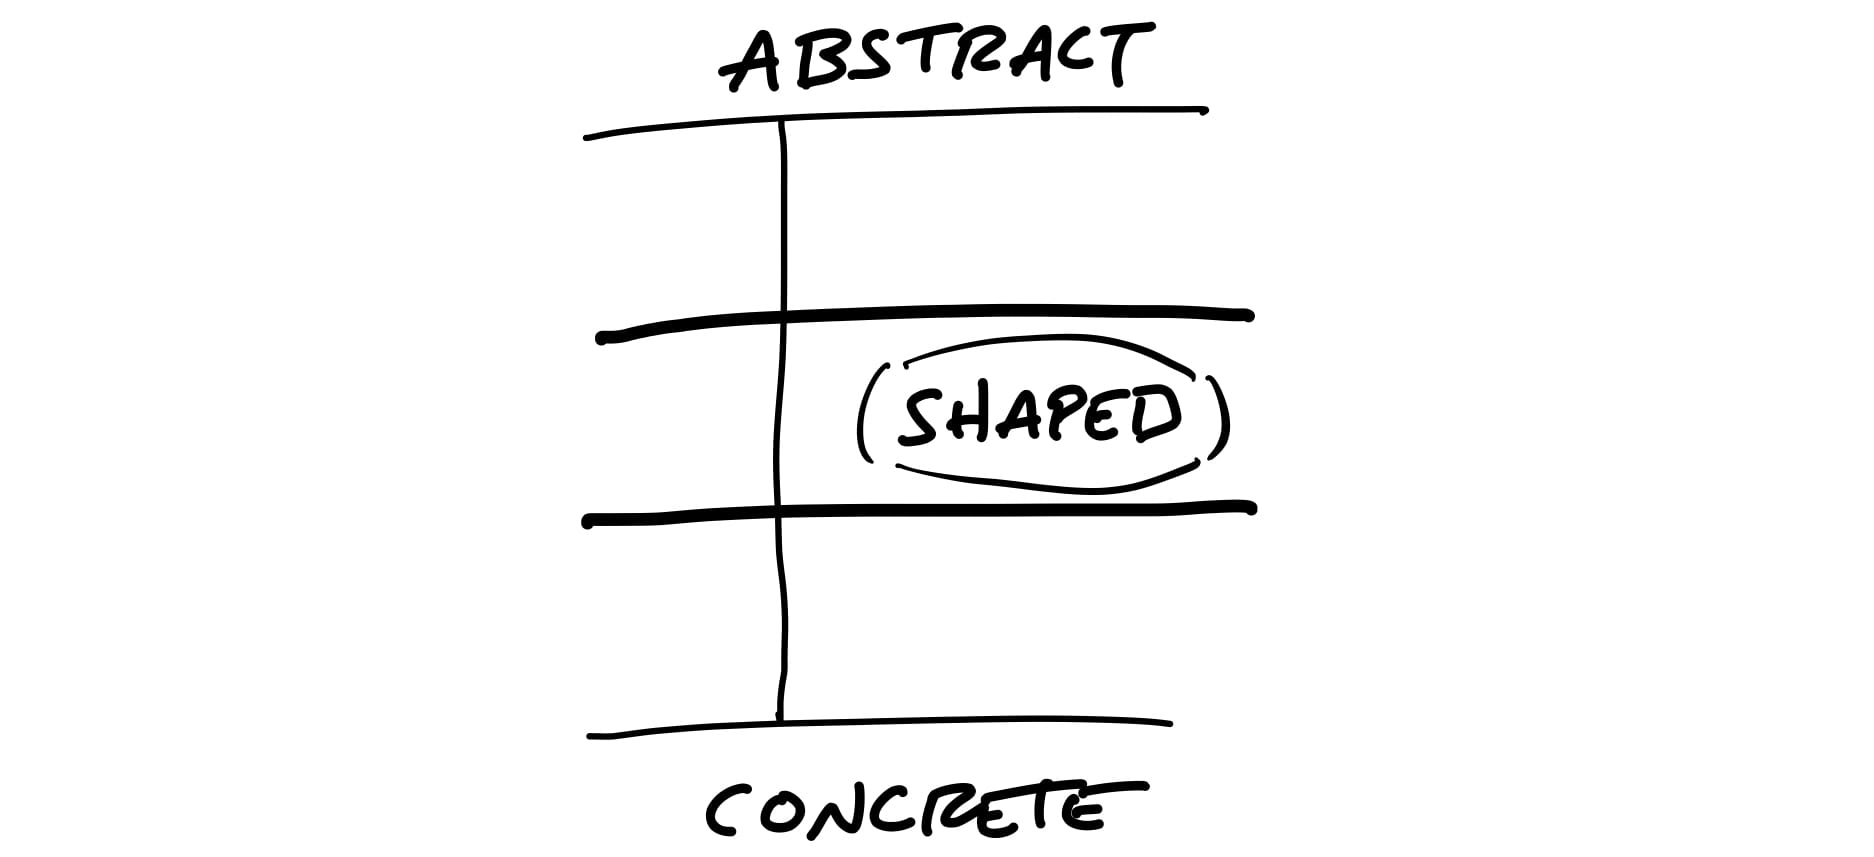 A vertical axis marked Abstract at the top and Concrete at the bottom. In the middle a zone is marked Shaped.